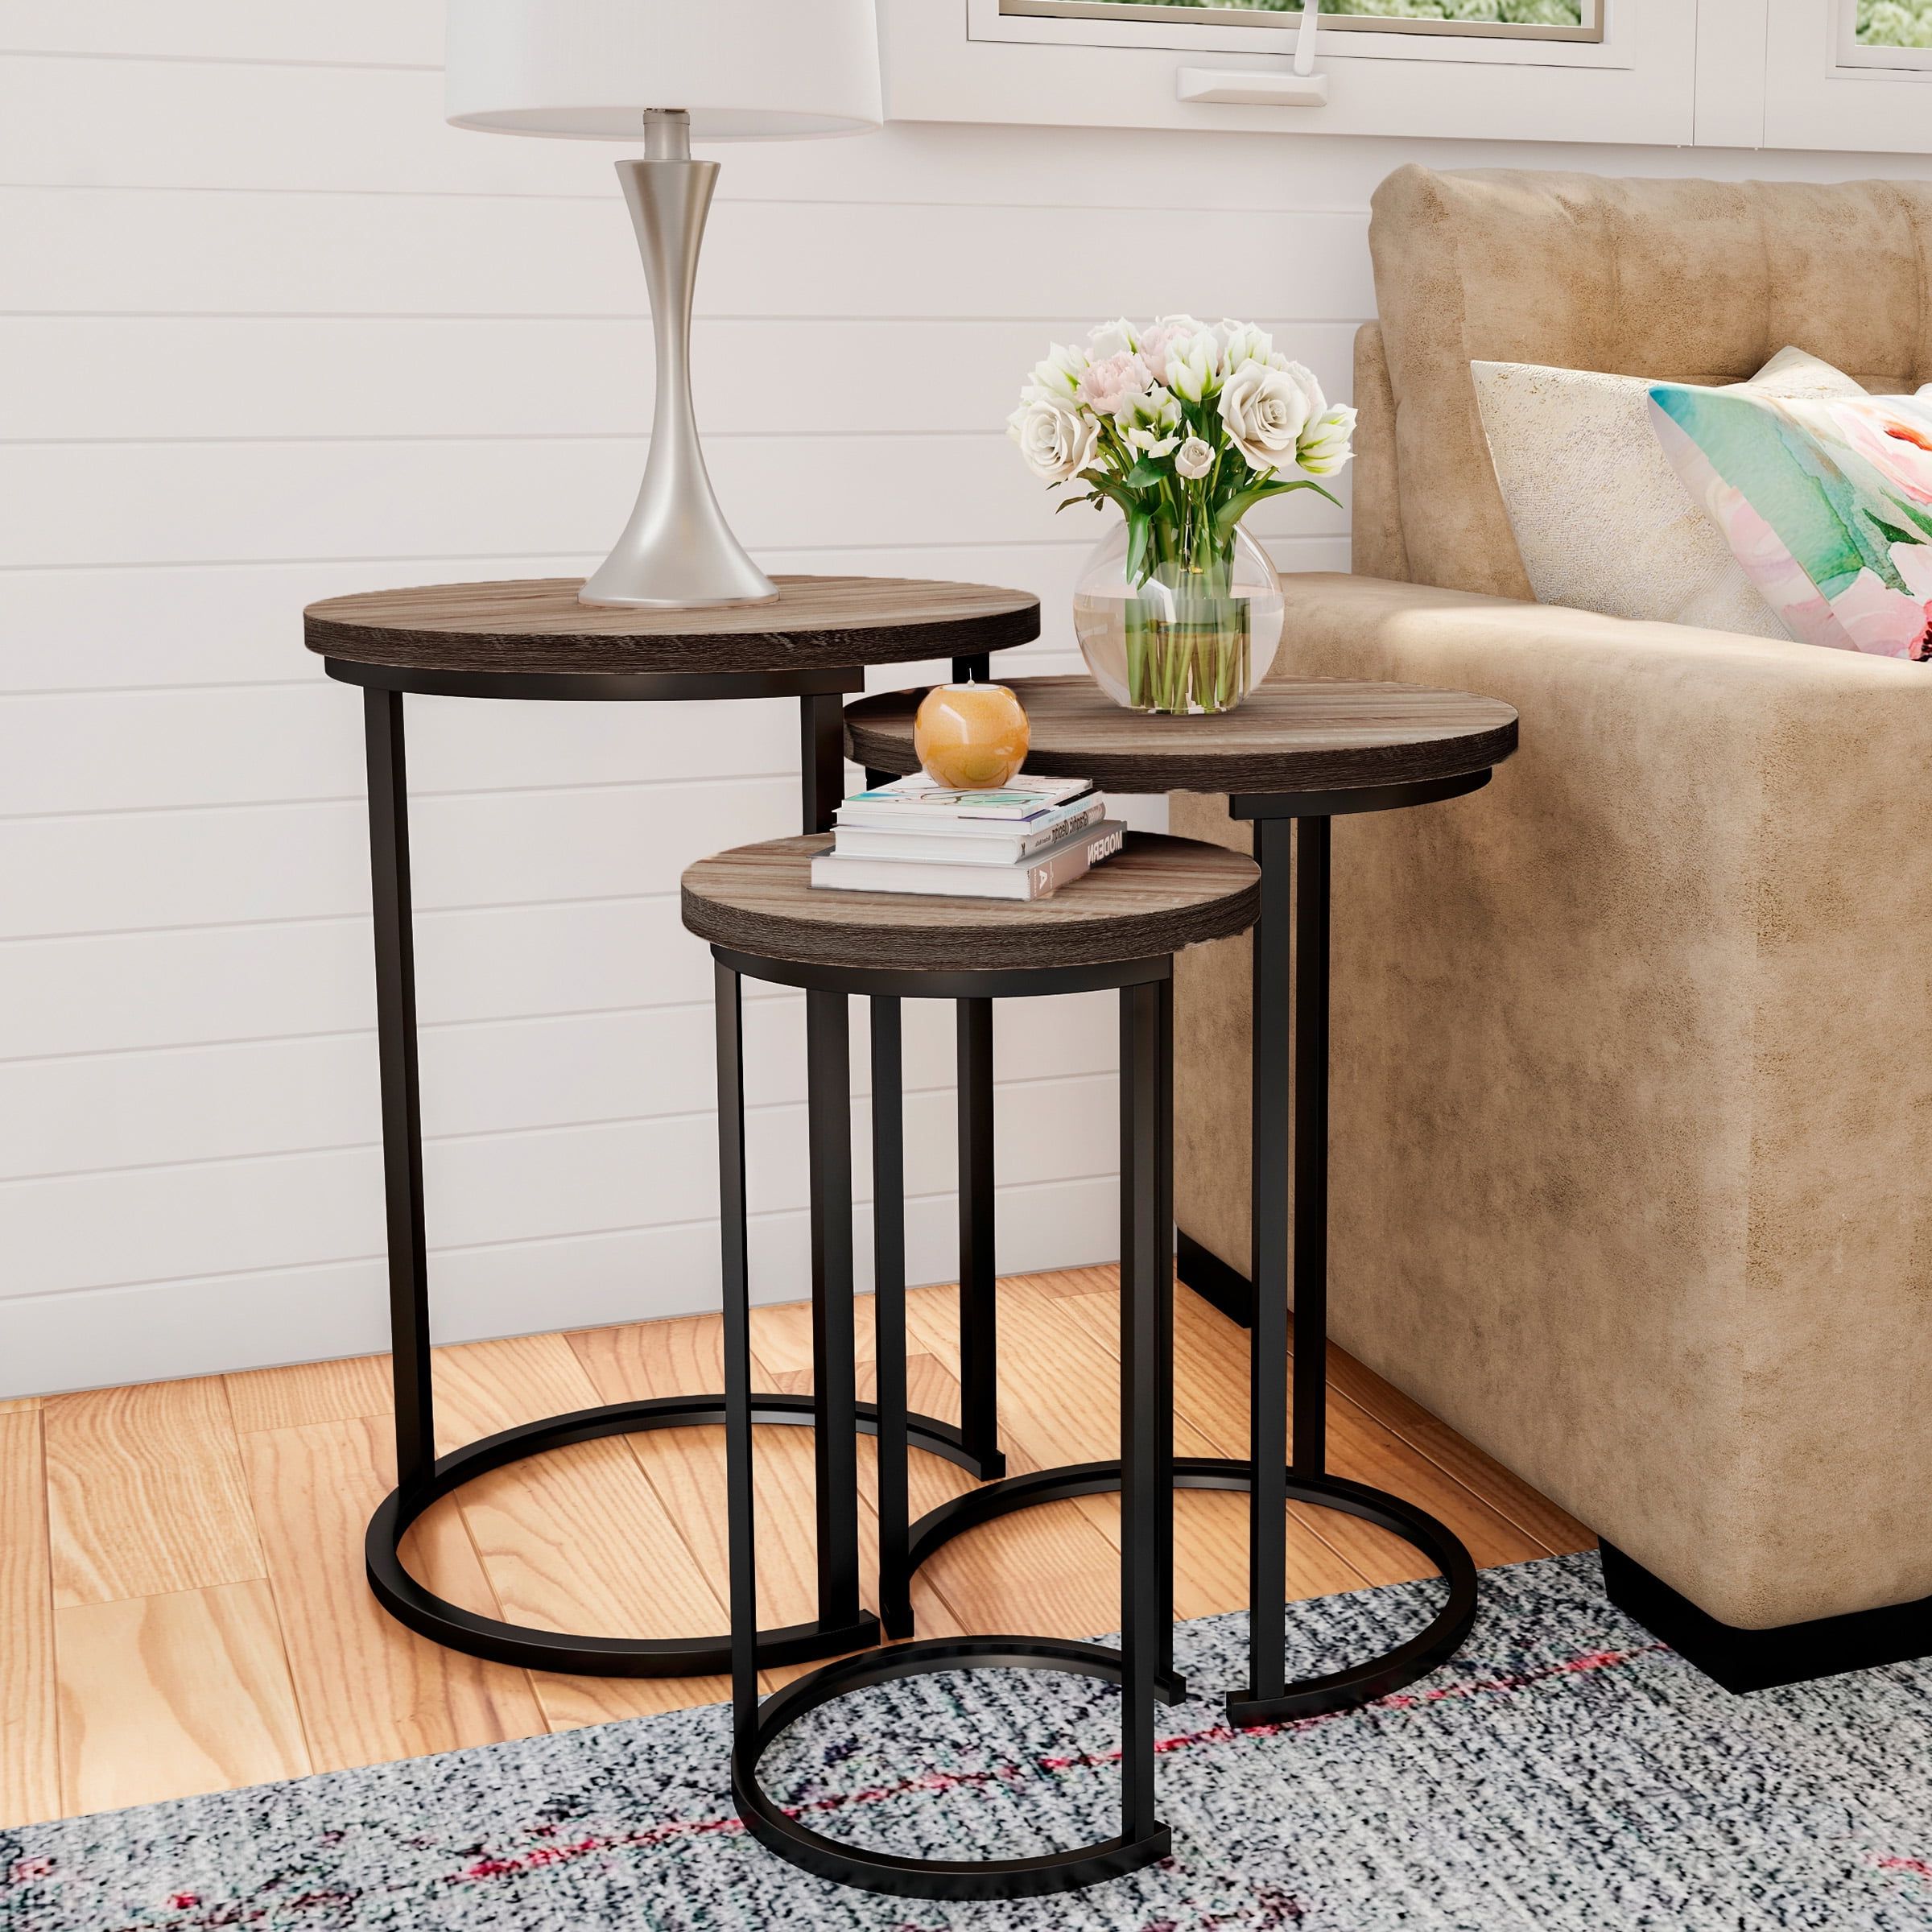 Current Coffee Tables Of 3 Nesting Tables Intended For Lavish Home Round Nesting End Tables With Metal Base (set Of 3), Brown (View 11 of 15)